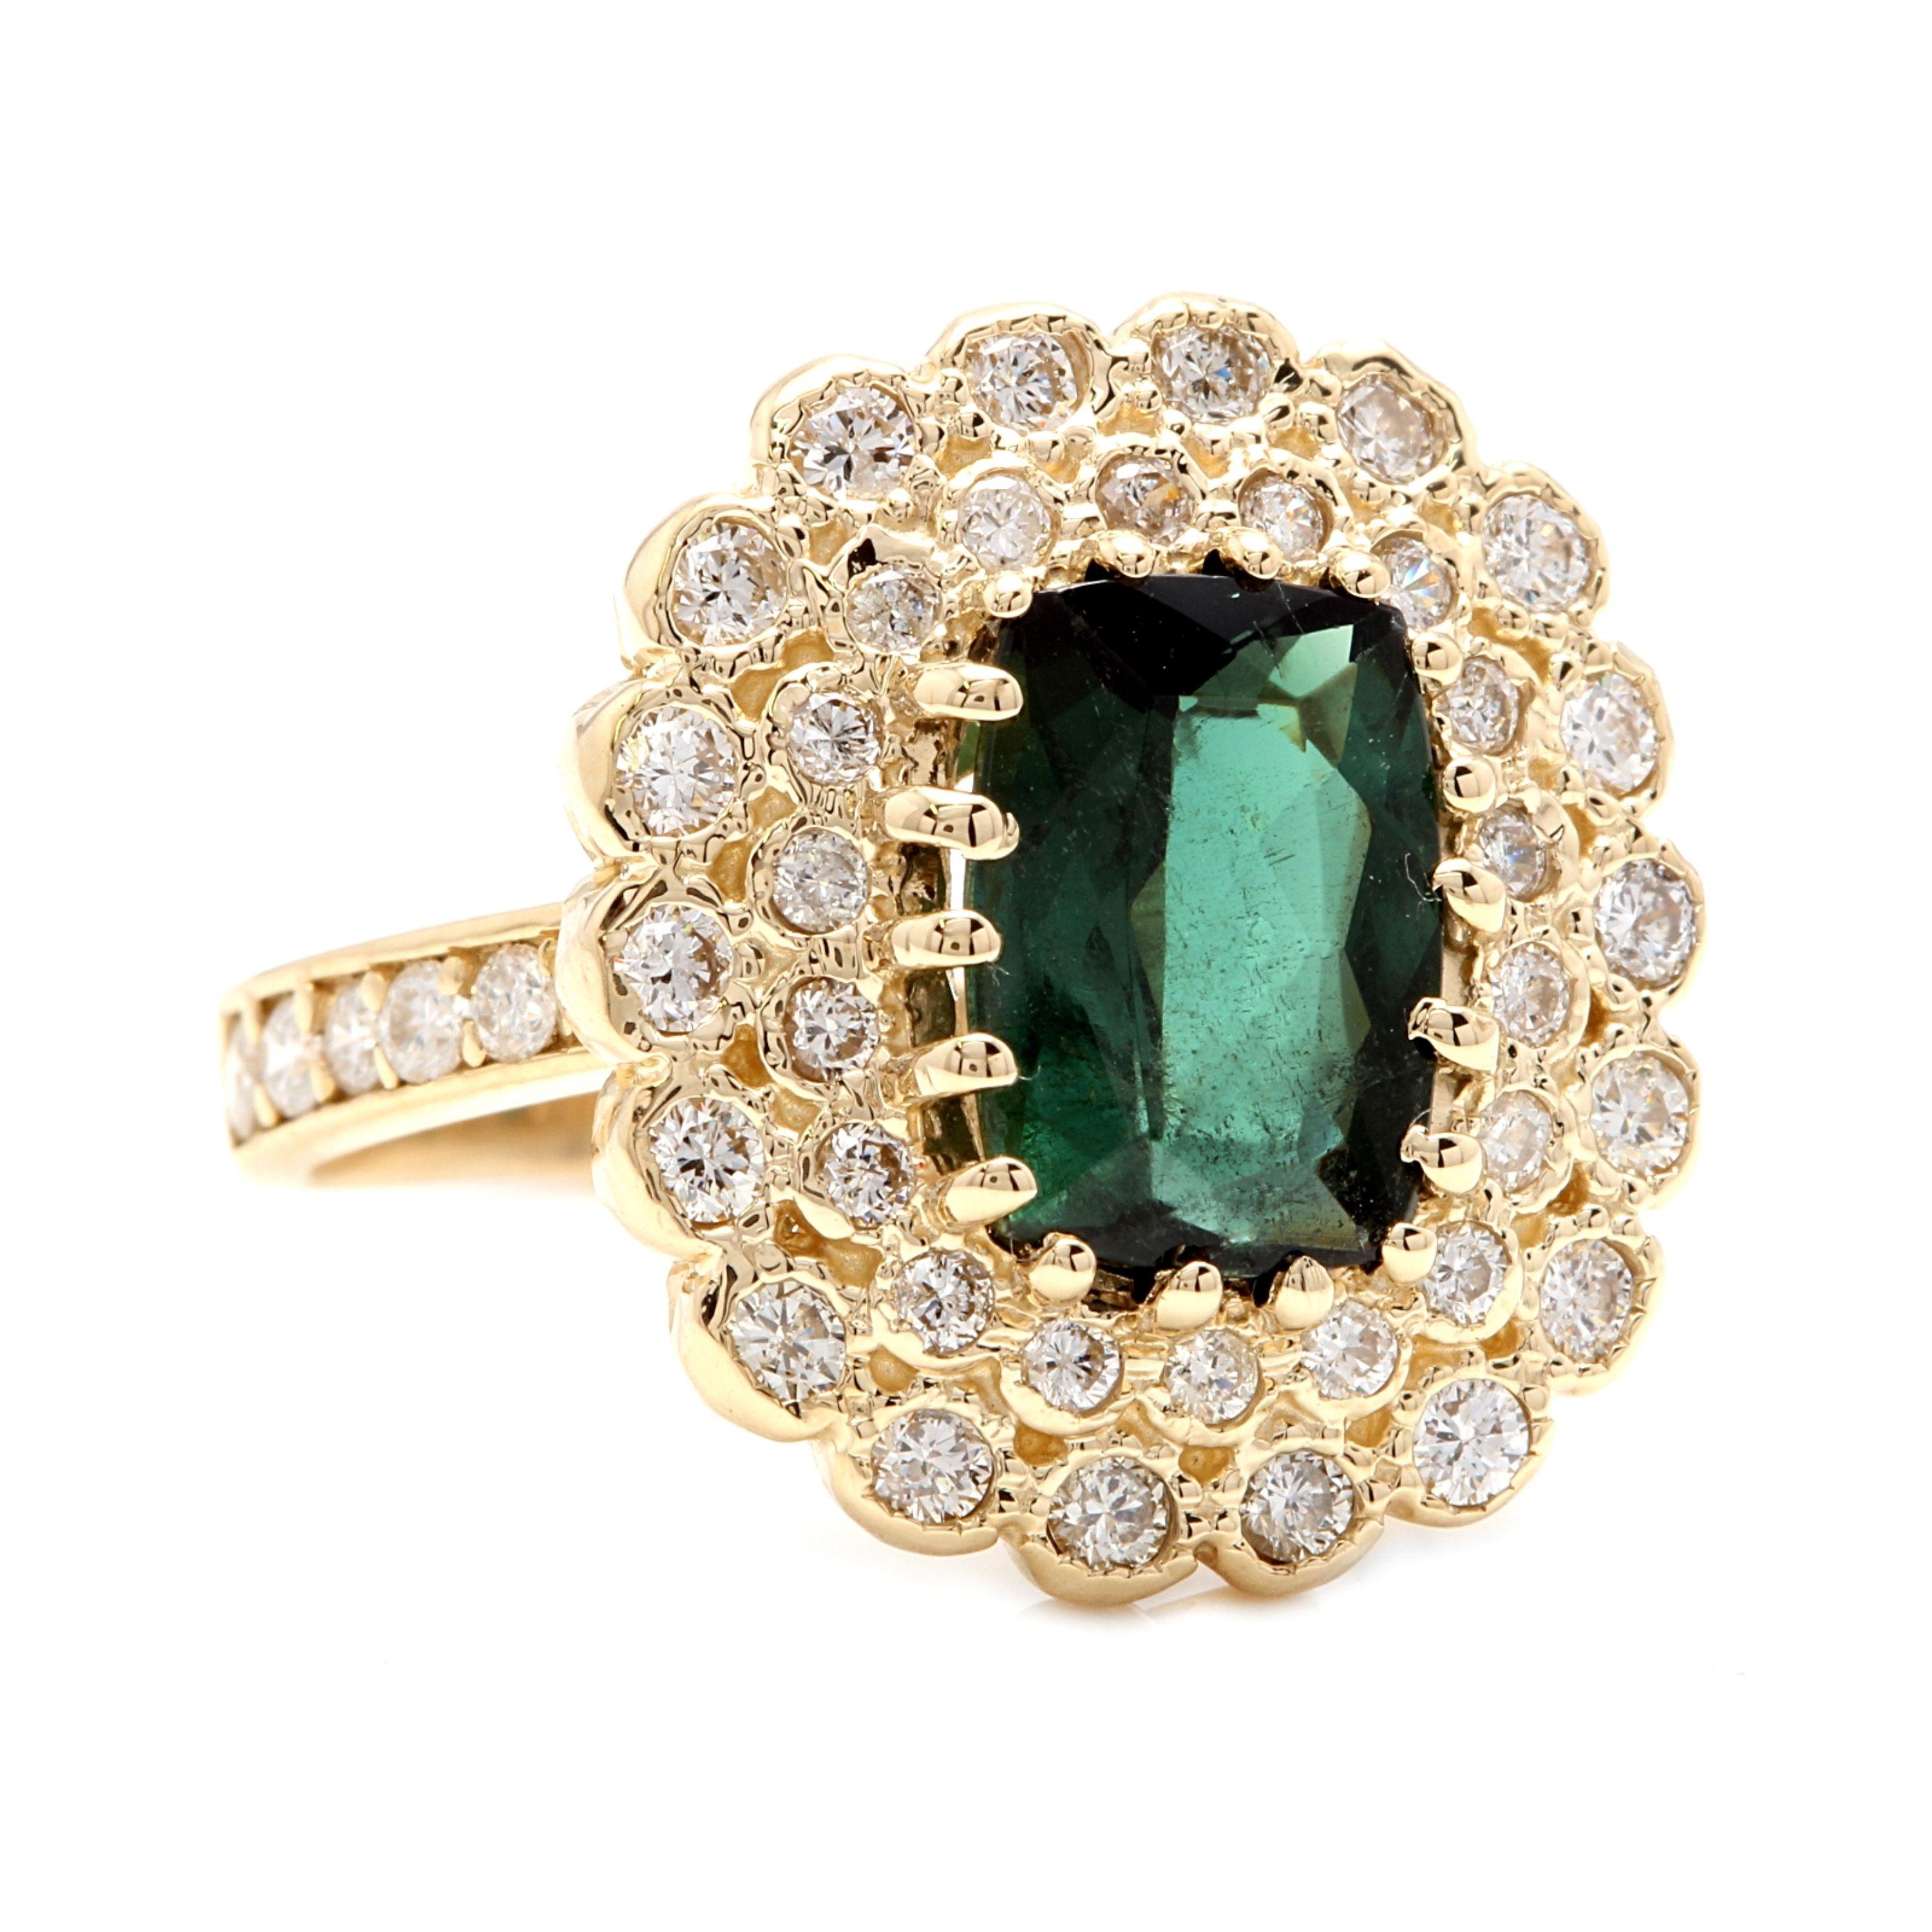 4.45 Carats Natural Very Nice Looking Green Tourmaline and Diamond 18K Solid Yellow Gold Ring

Total Natural  Cushion Tourmaline Weight is: Approx. 3.50 Carats (Treatment-Heat)

Tourmaline Measures: Approx. 10.00 x 8.00mm

Natural Round Diamonds